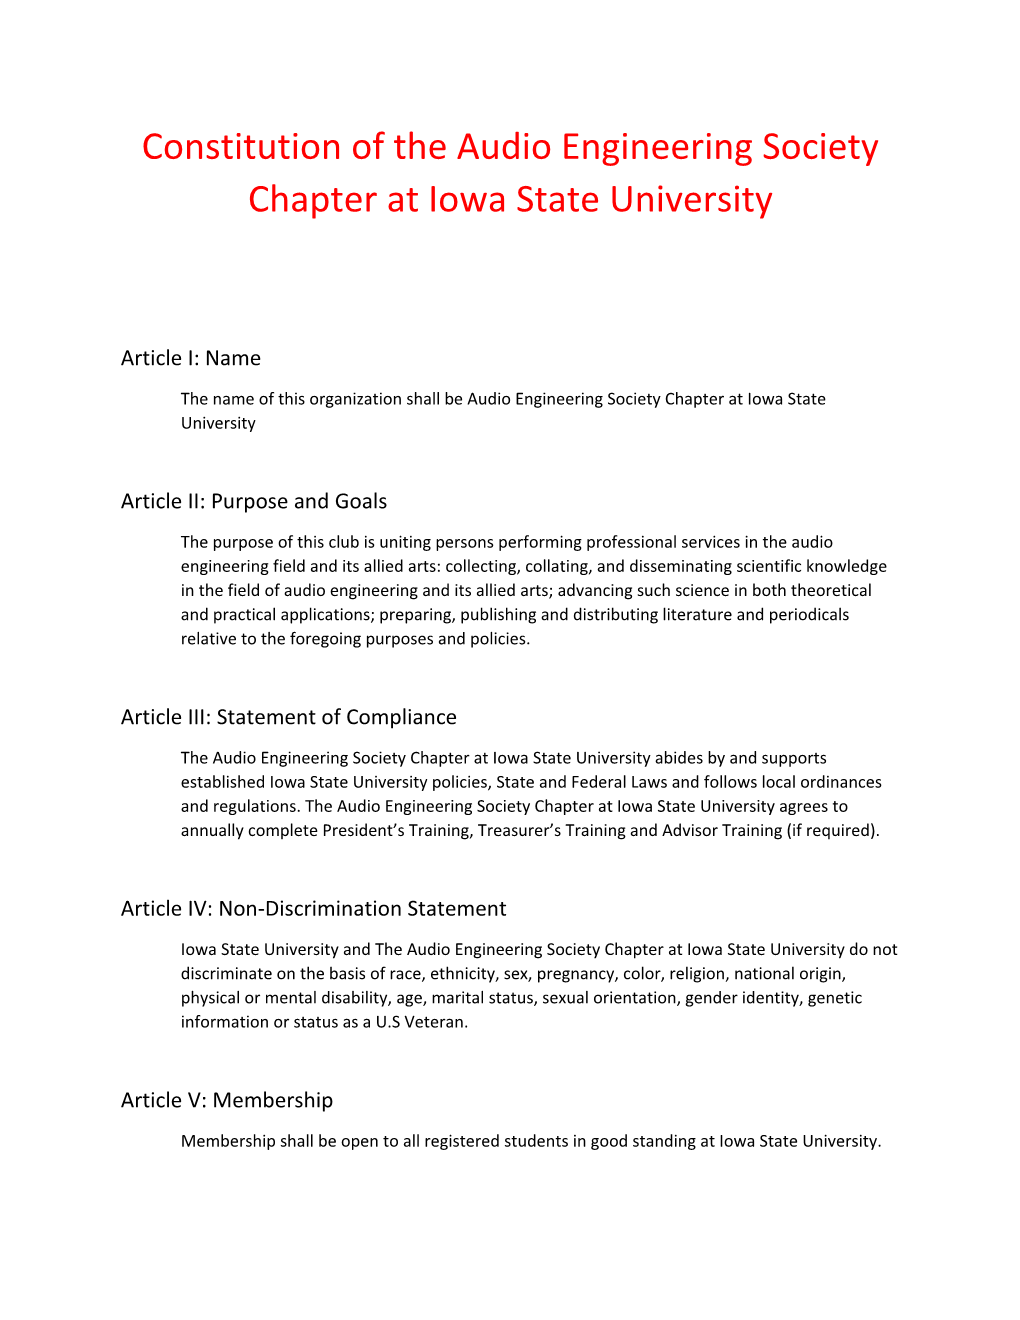 Constitution of the Audio Engineering Society Chapter at Iowa State University